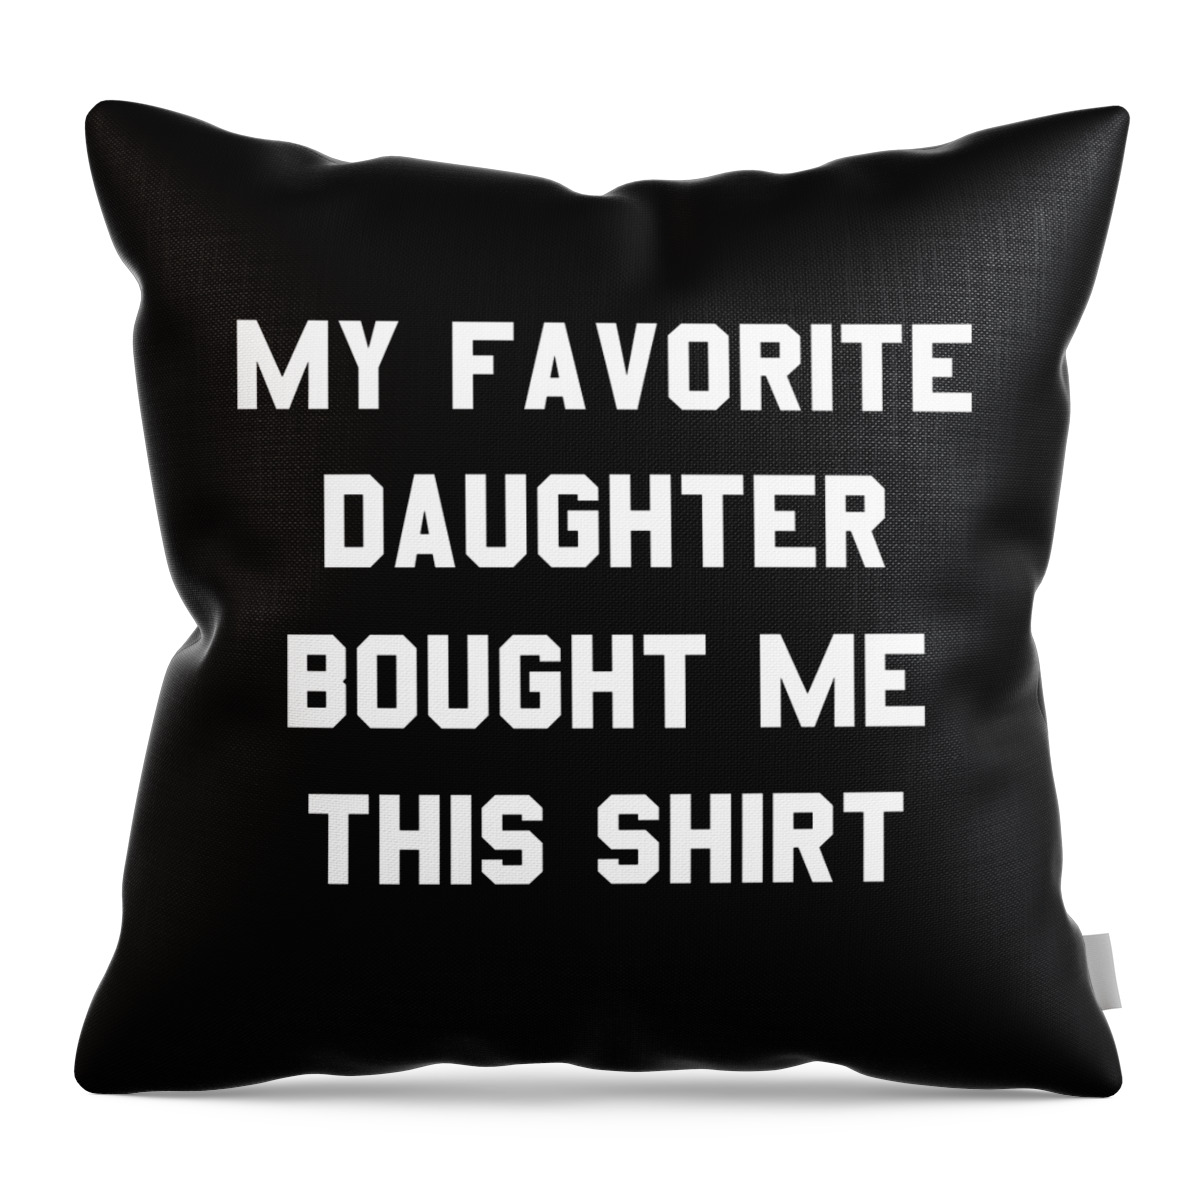 Funny Throw Pillow featuring the digital art My Favorite Daughter Bought Me This Shirt by Flippin Sweet Gear